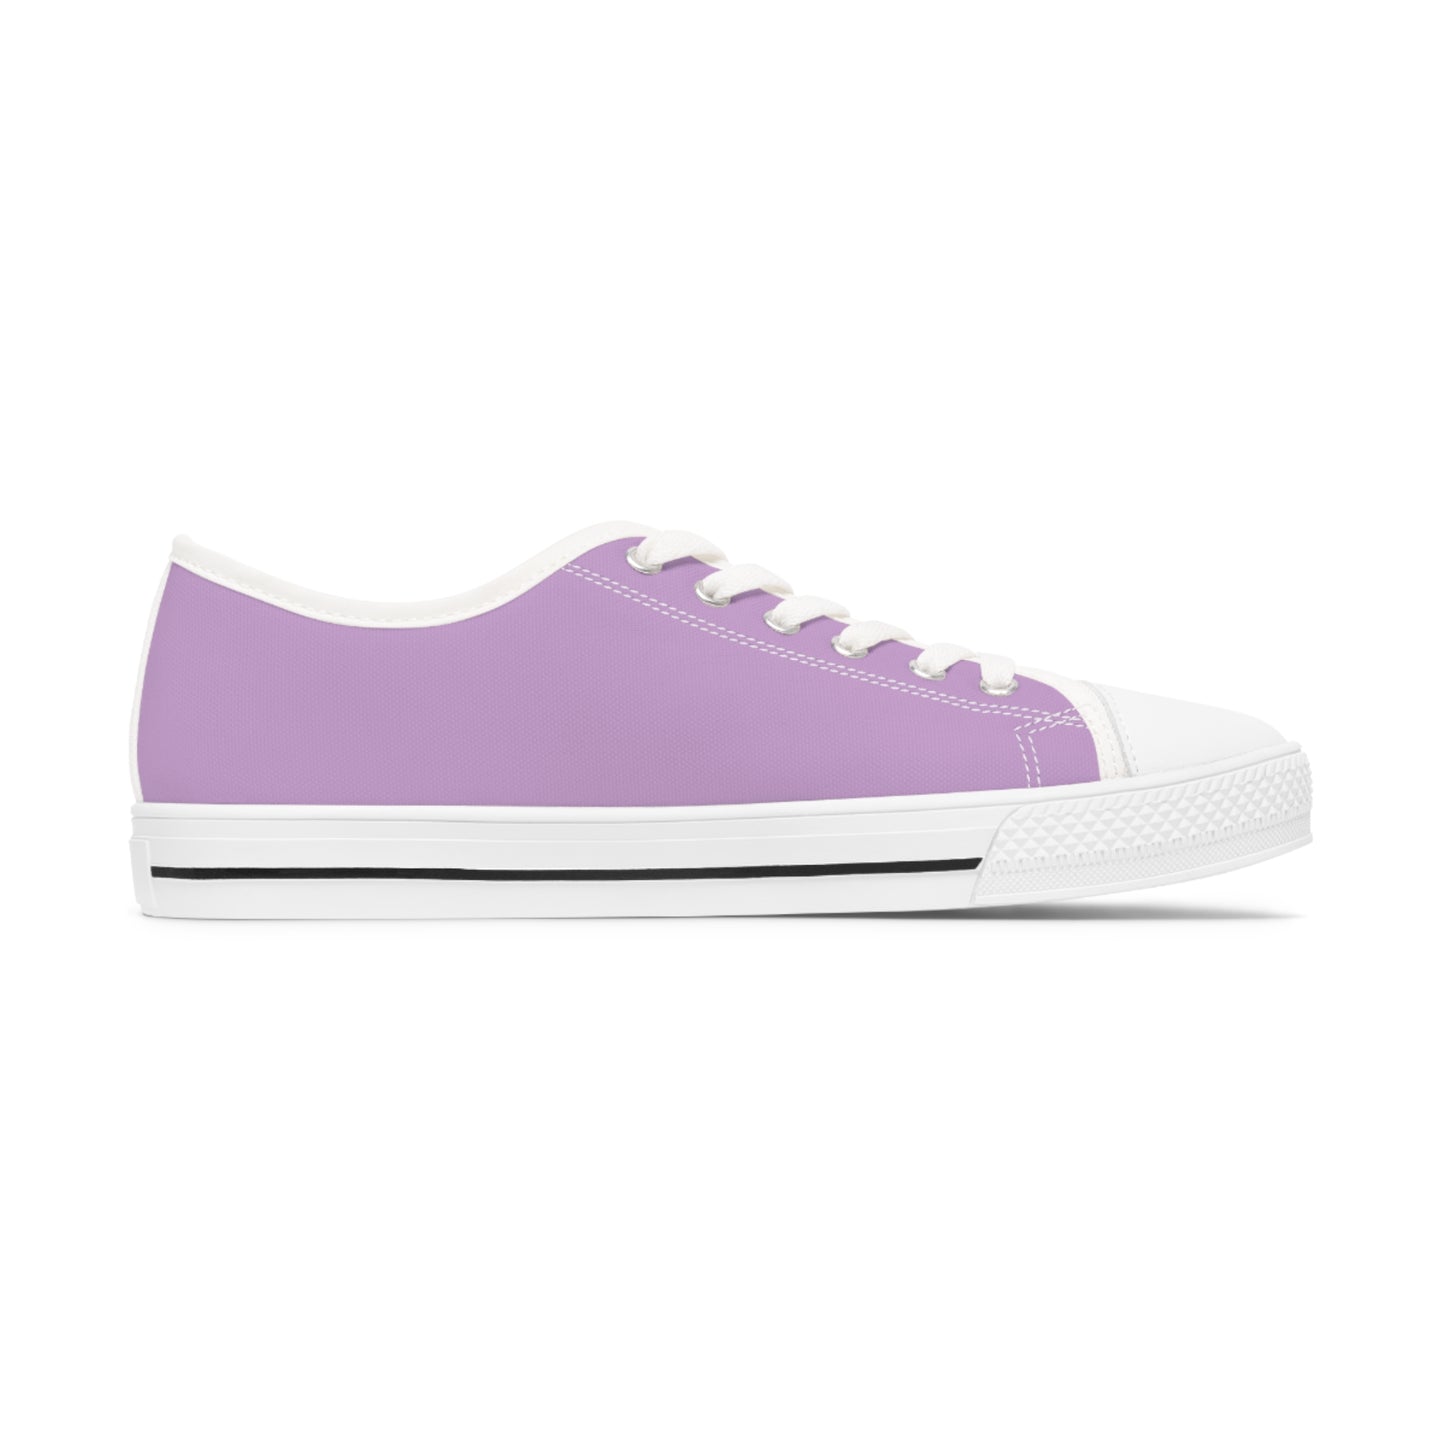 Women's Canvas Low Top Solid Color Sneakers - Pinky Purple US 12 White sole